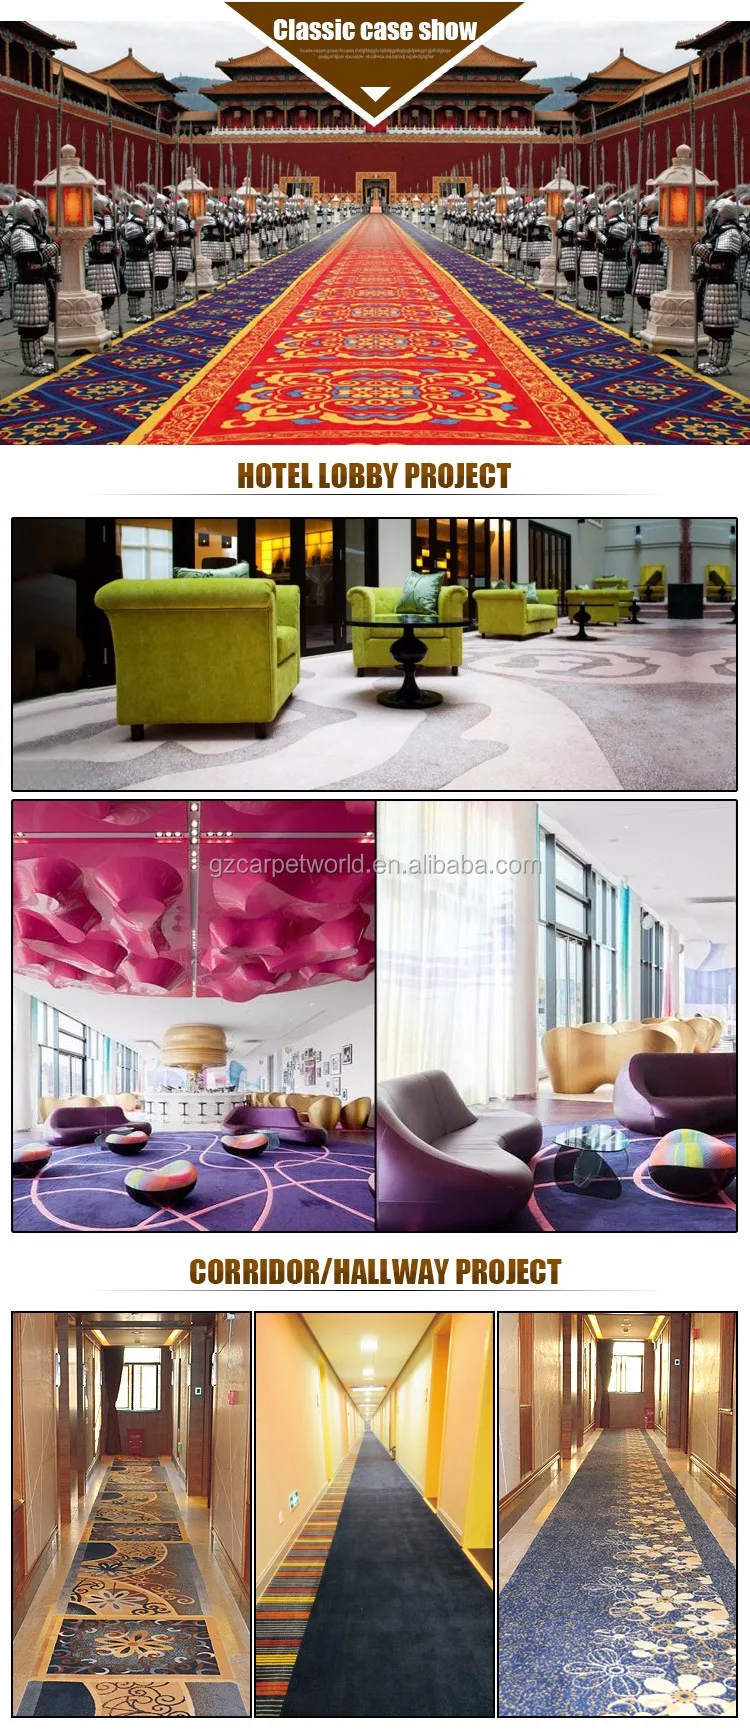 New Design Hotel Carpet Rolls Nylon Wall To Wall Carpets In Guangzhou